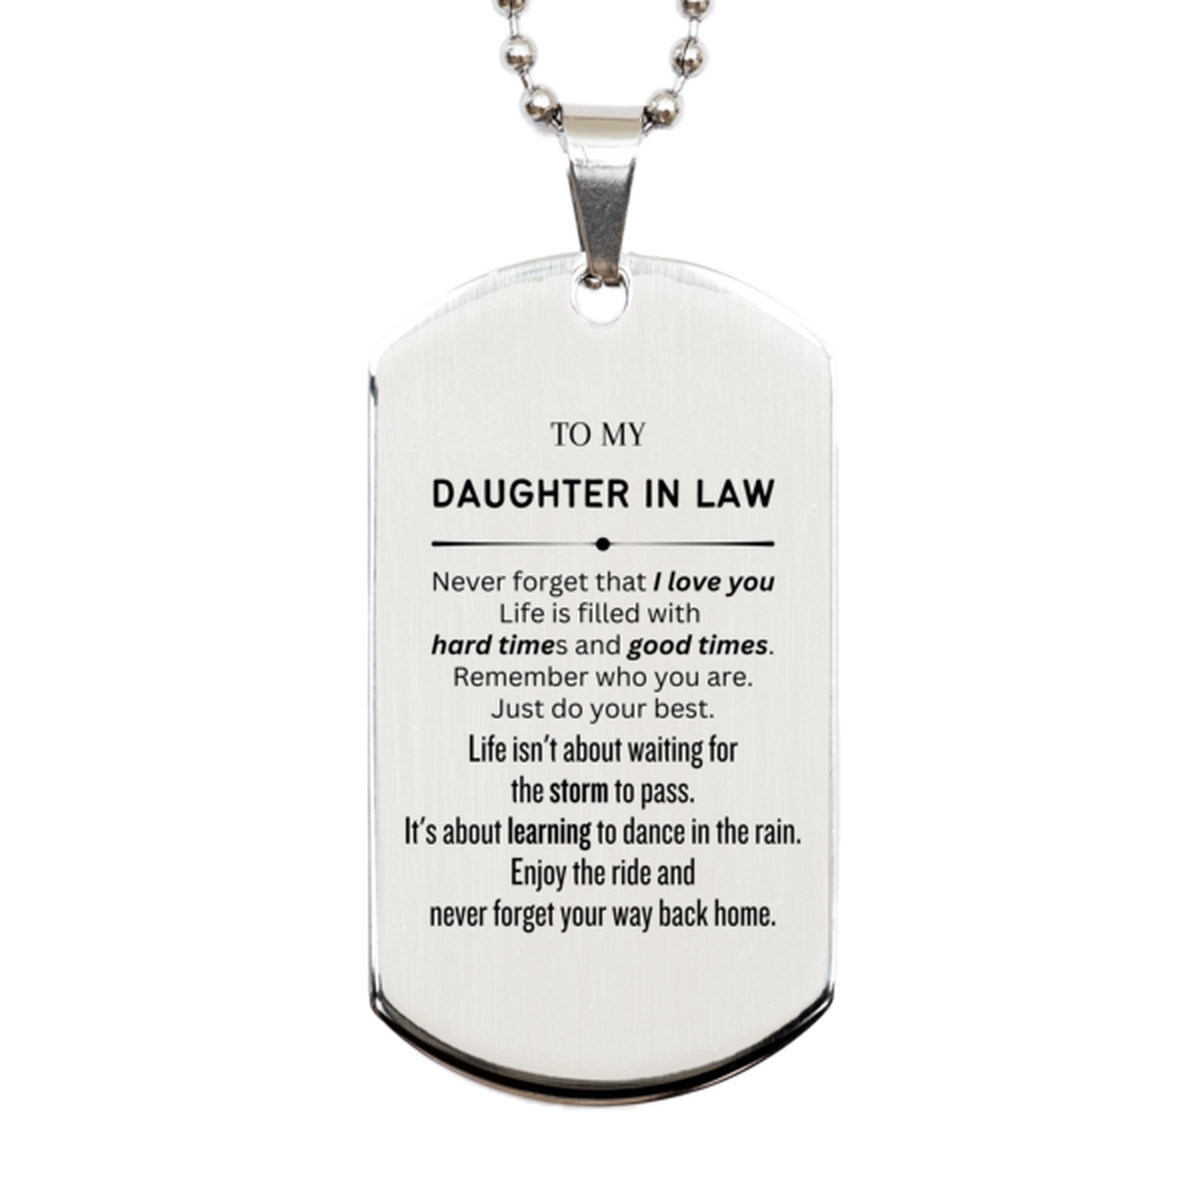 Christmas Daughter In Law Silver Dog Tag Gifts, To My Daughter In Law Birthday Thank You Gifts For Daughter In Law, Graduation Unique Gifts For Daughter In Law To My Daughter In Law Never forget that I love you life is filled with hard times and good time